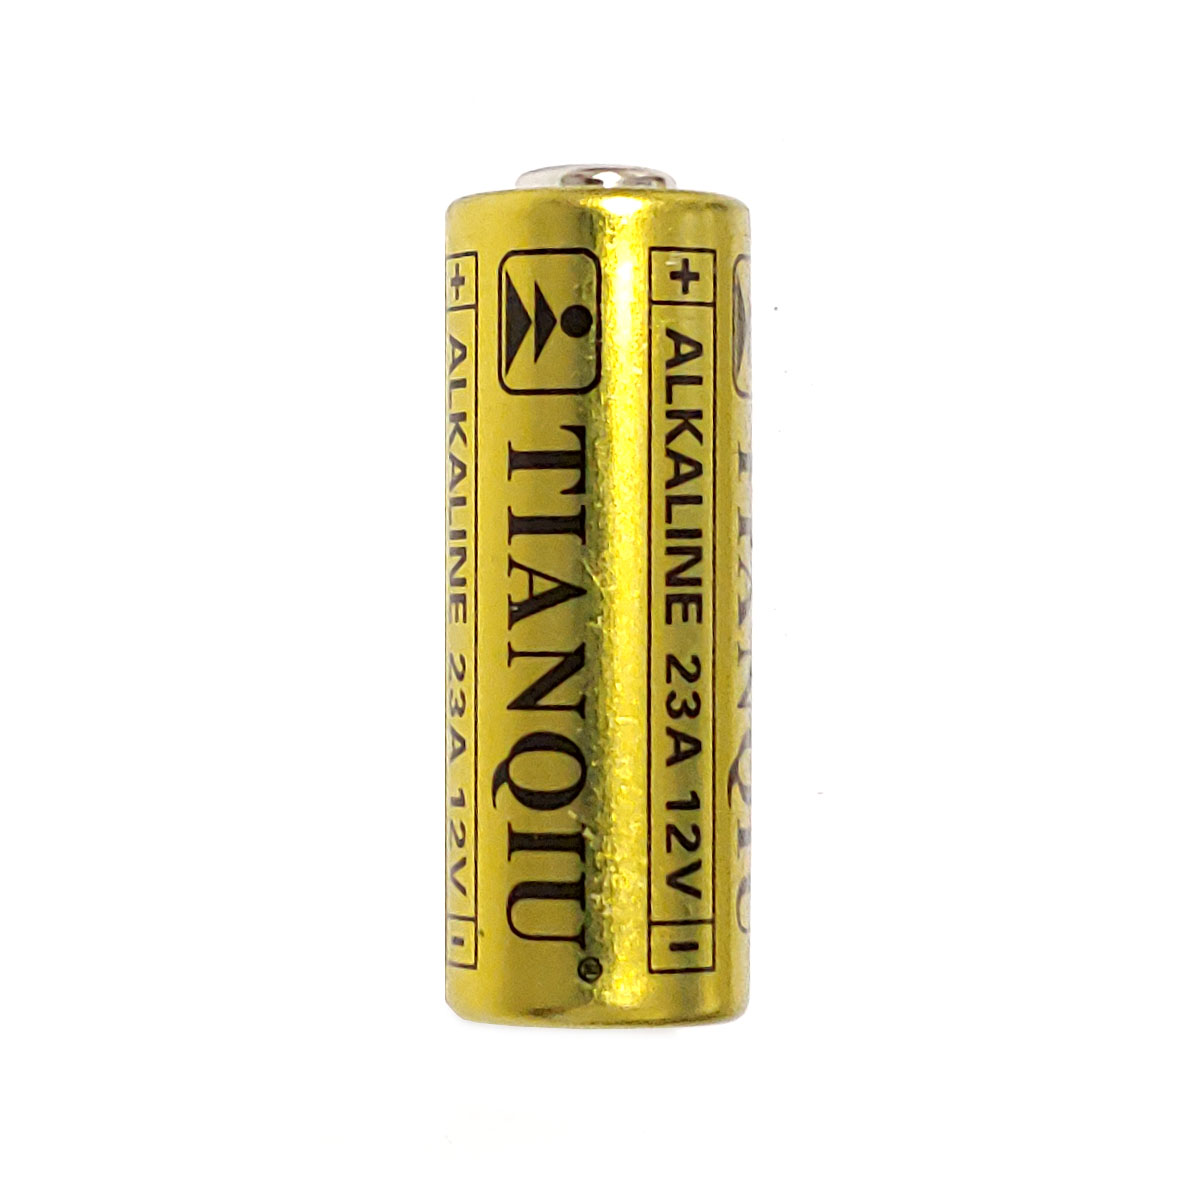 Alkaline Batteries- Buy A23 replacements and equivalents